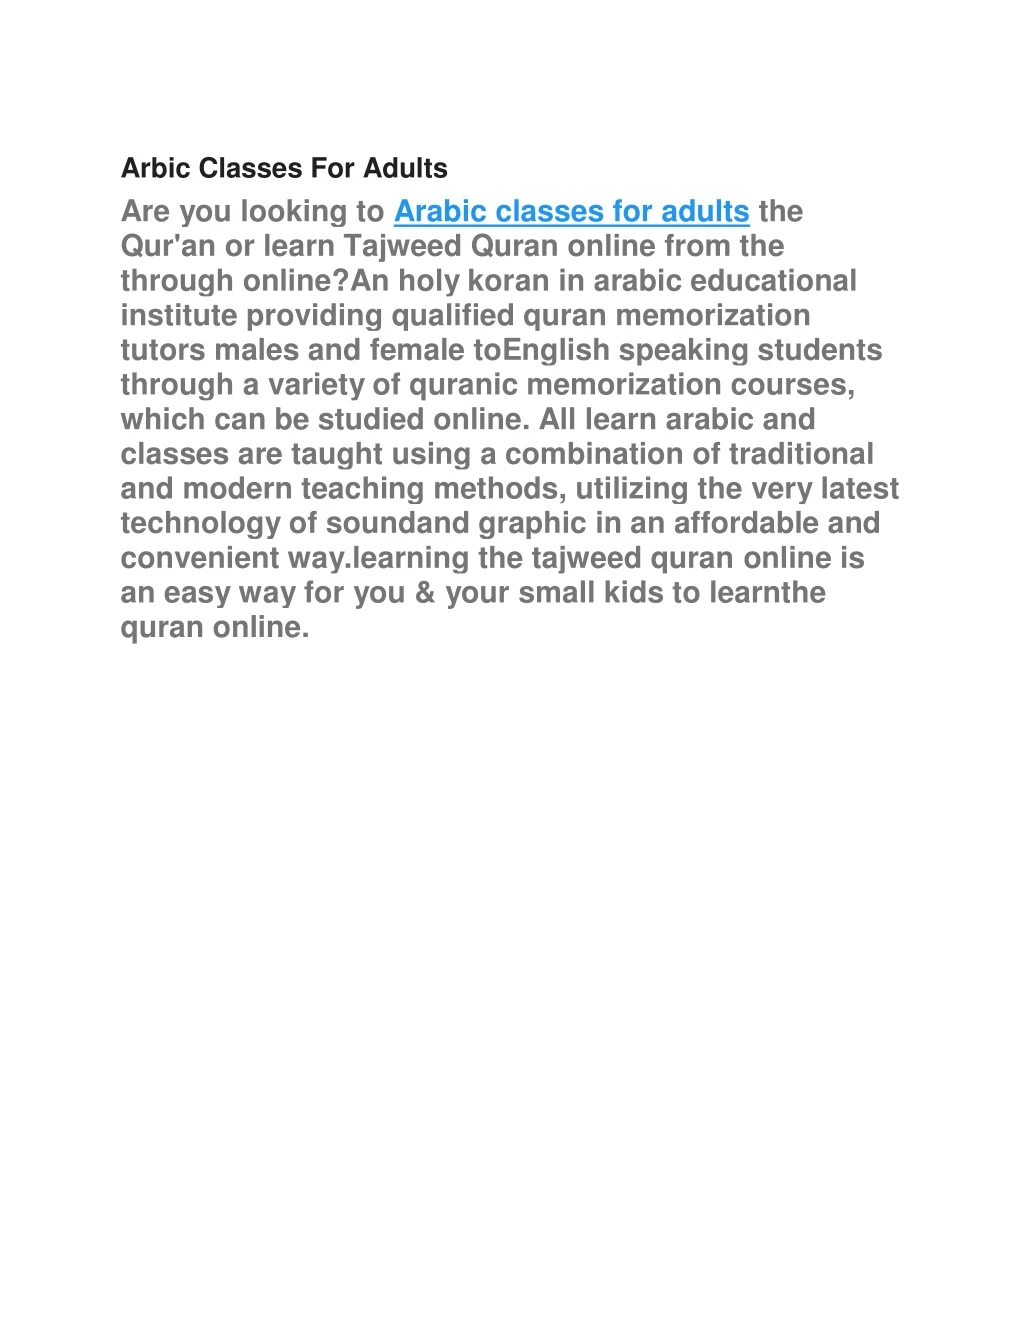 arbic classes for adults are you looking